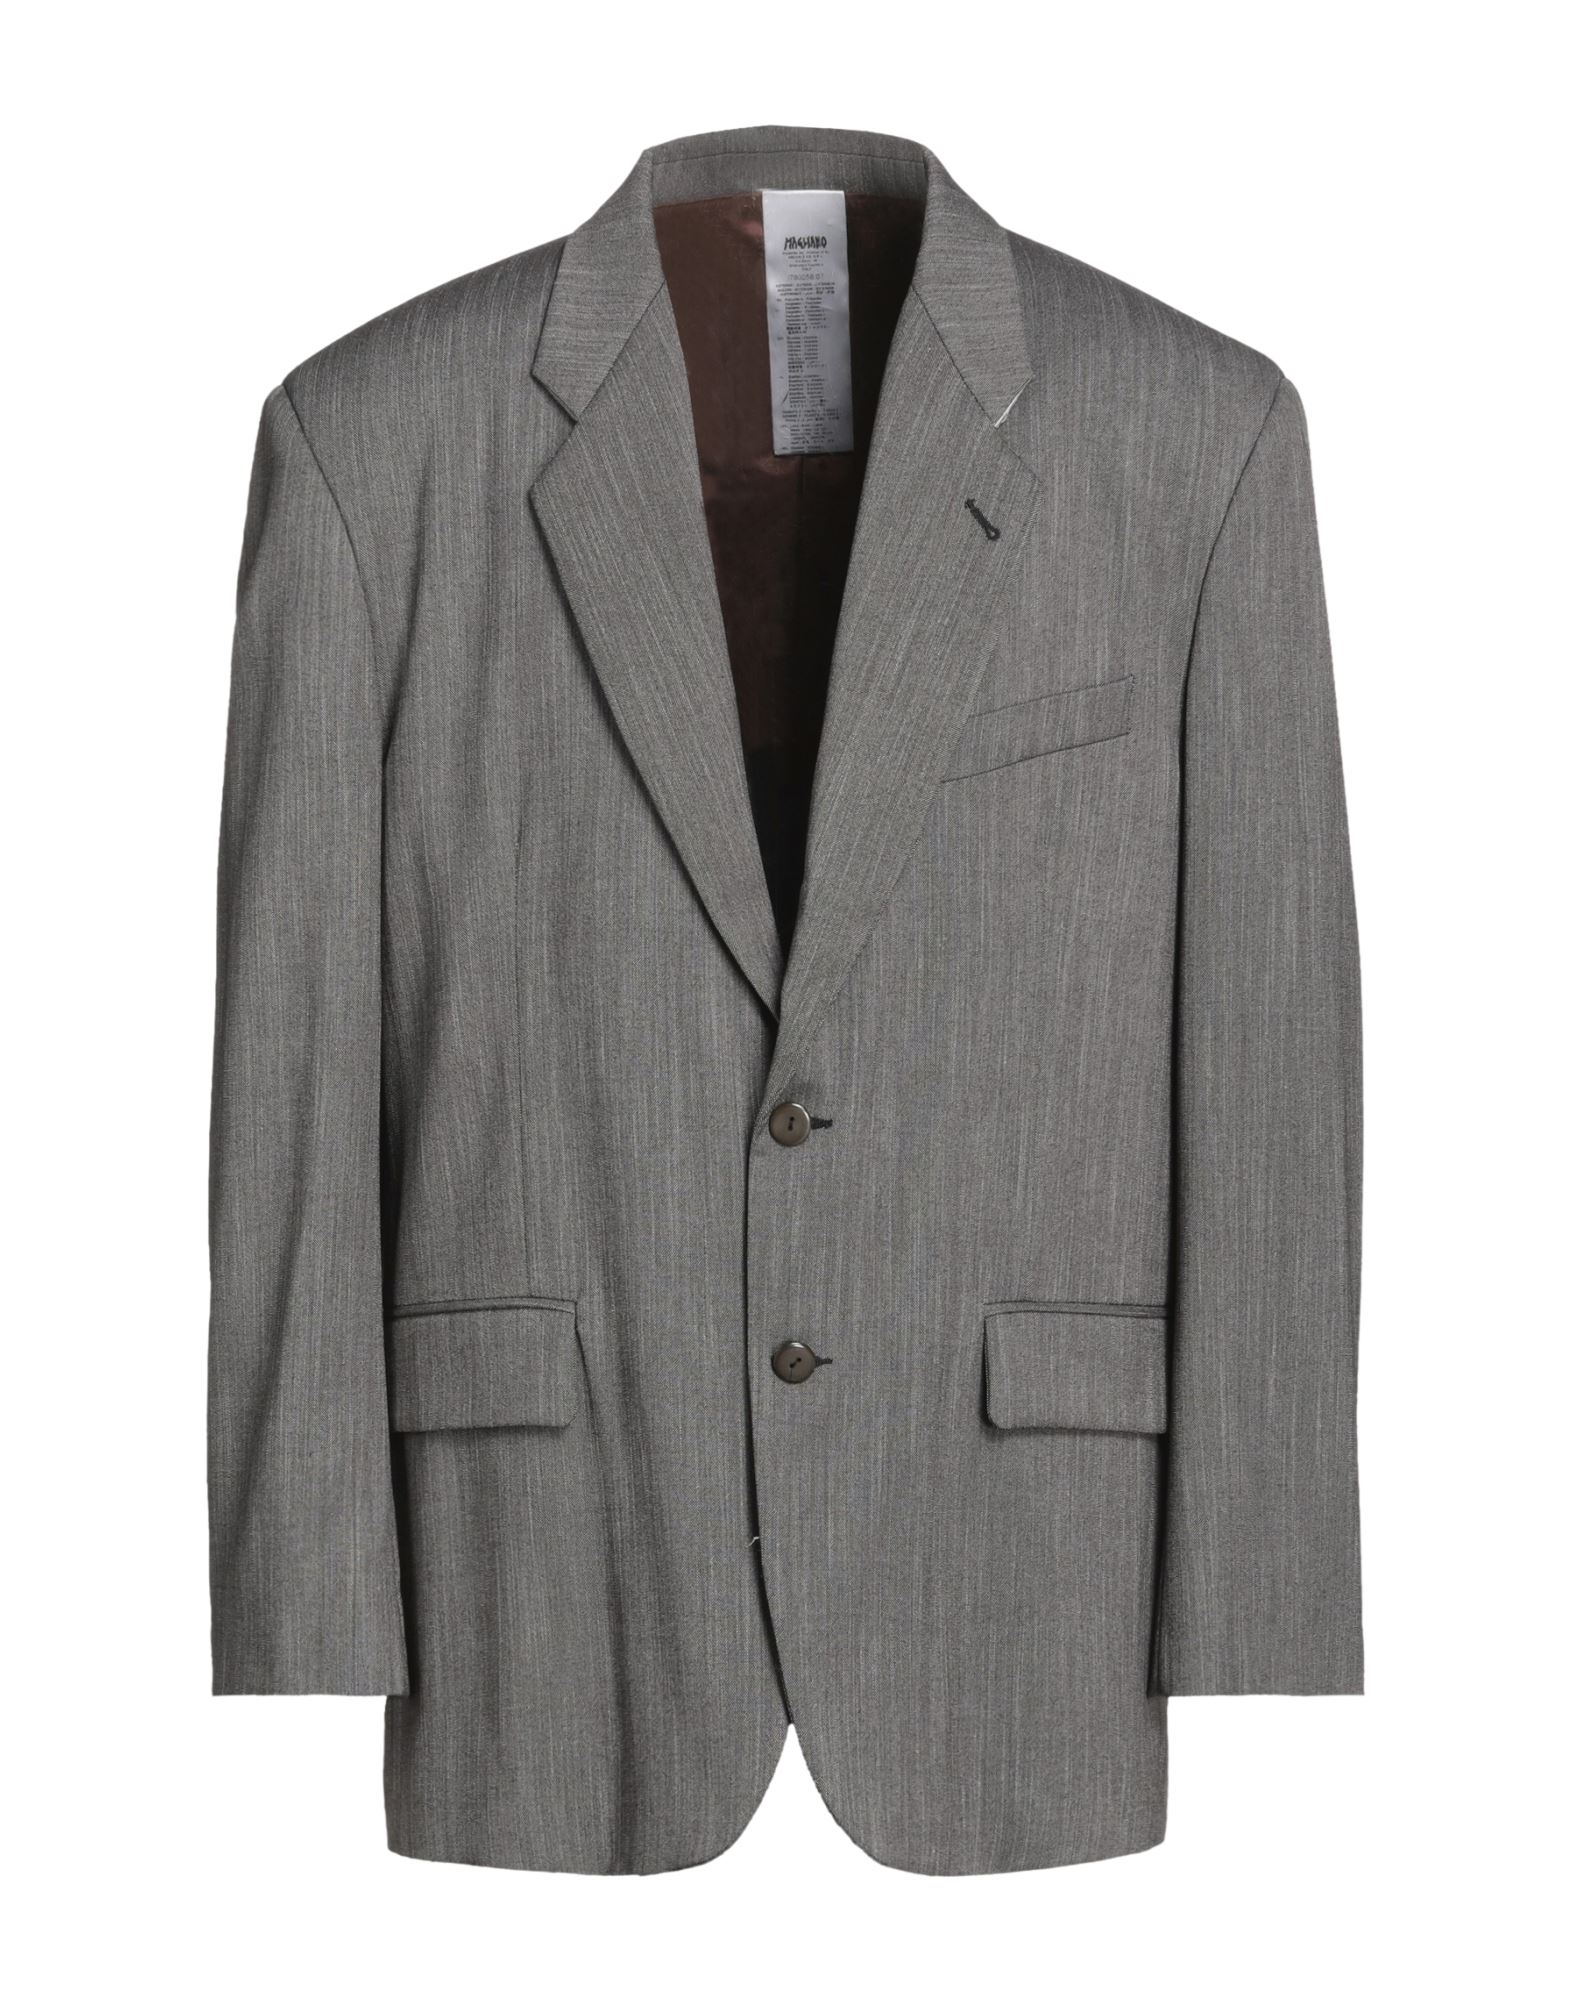 MAGLIANO Suit jackets